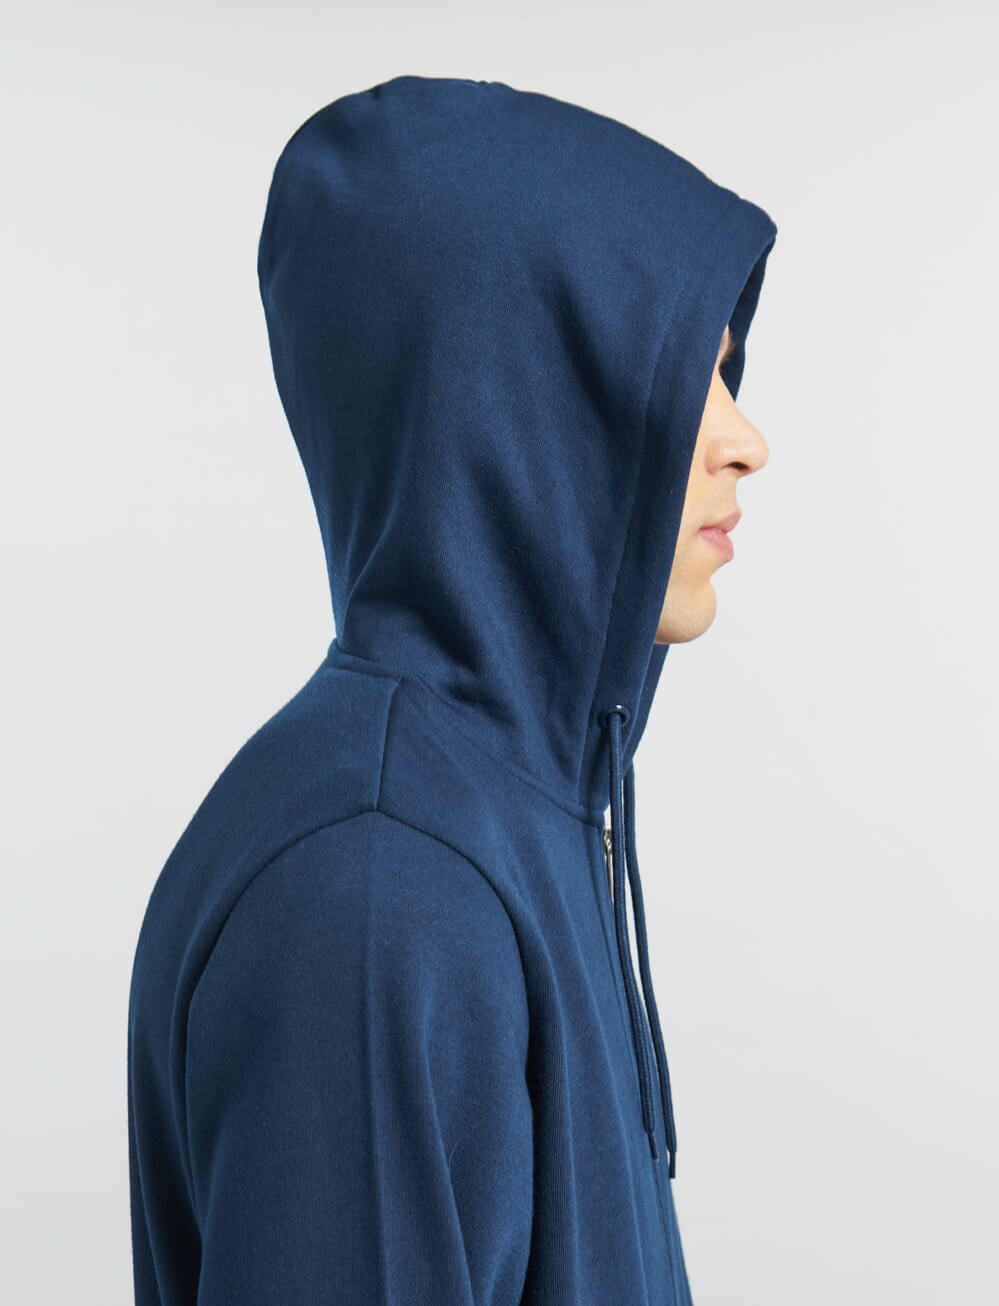 Official Chelsea Full Zip Hoodie - Navy - The World Football Store